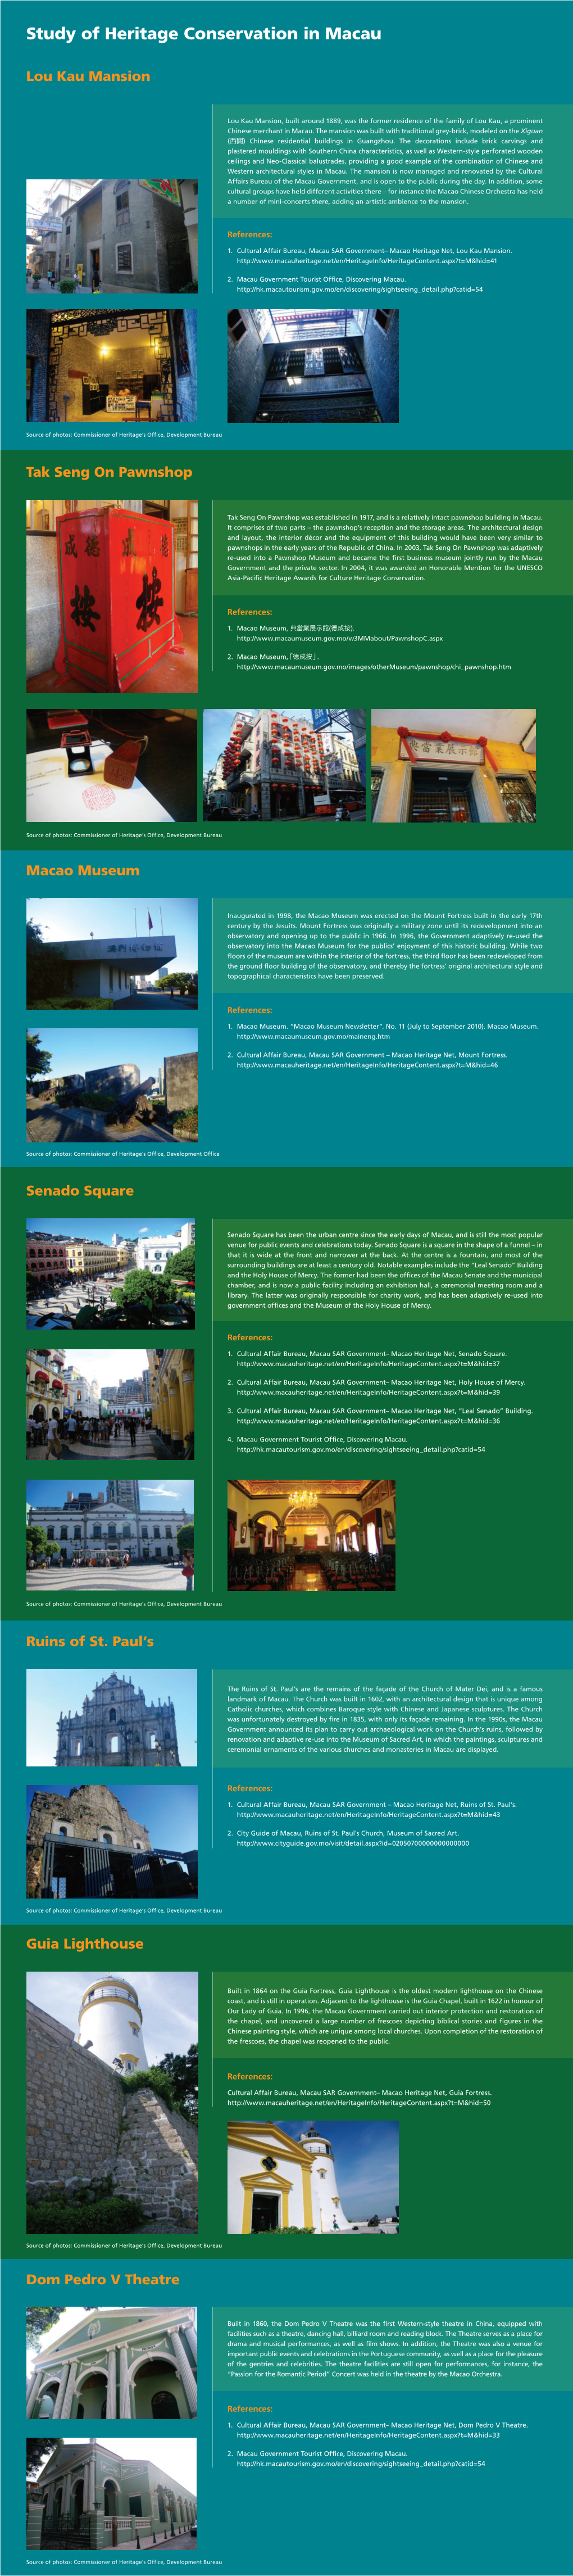 Study of Heritage Conservation in Macau